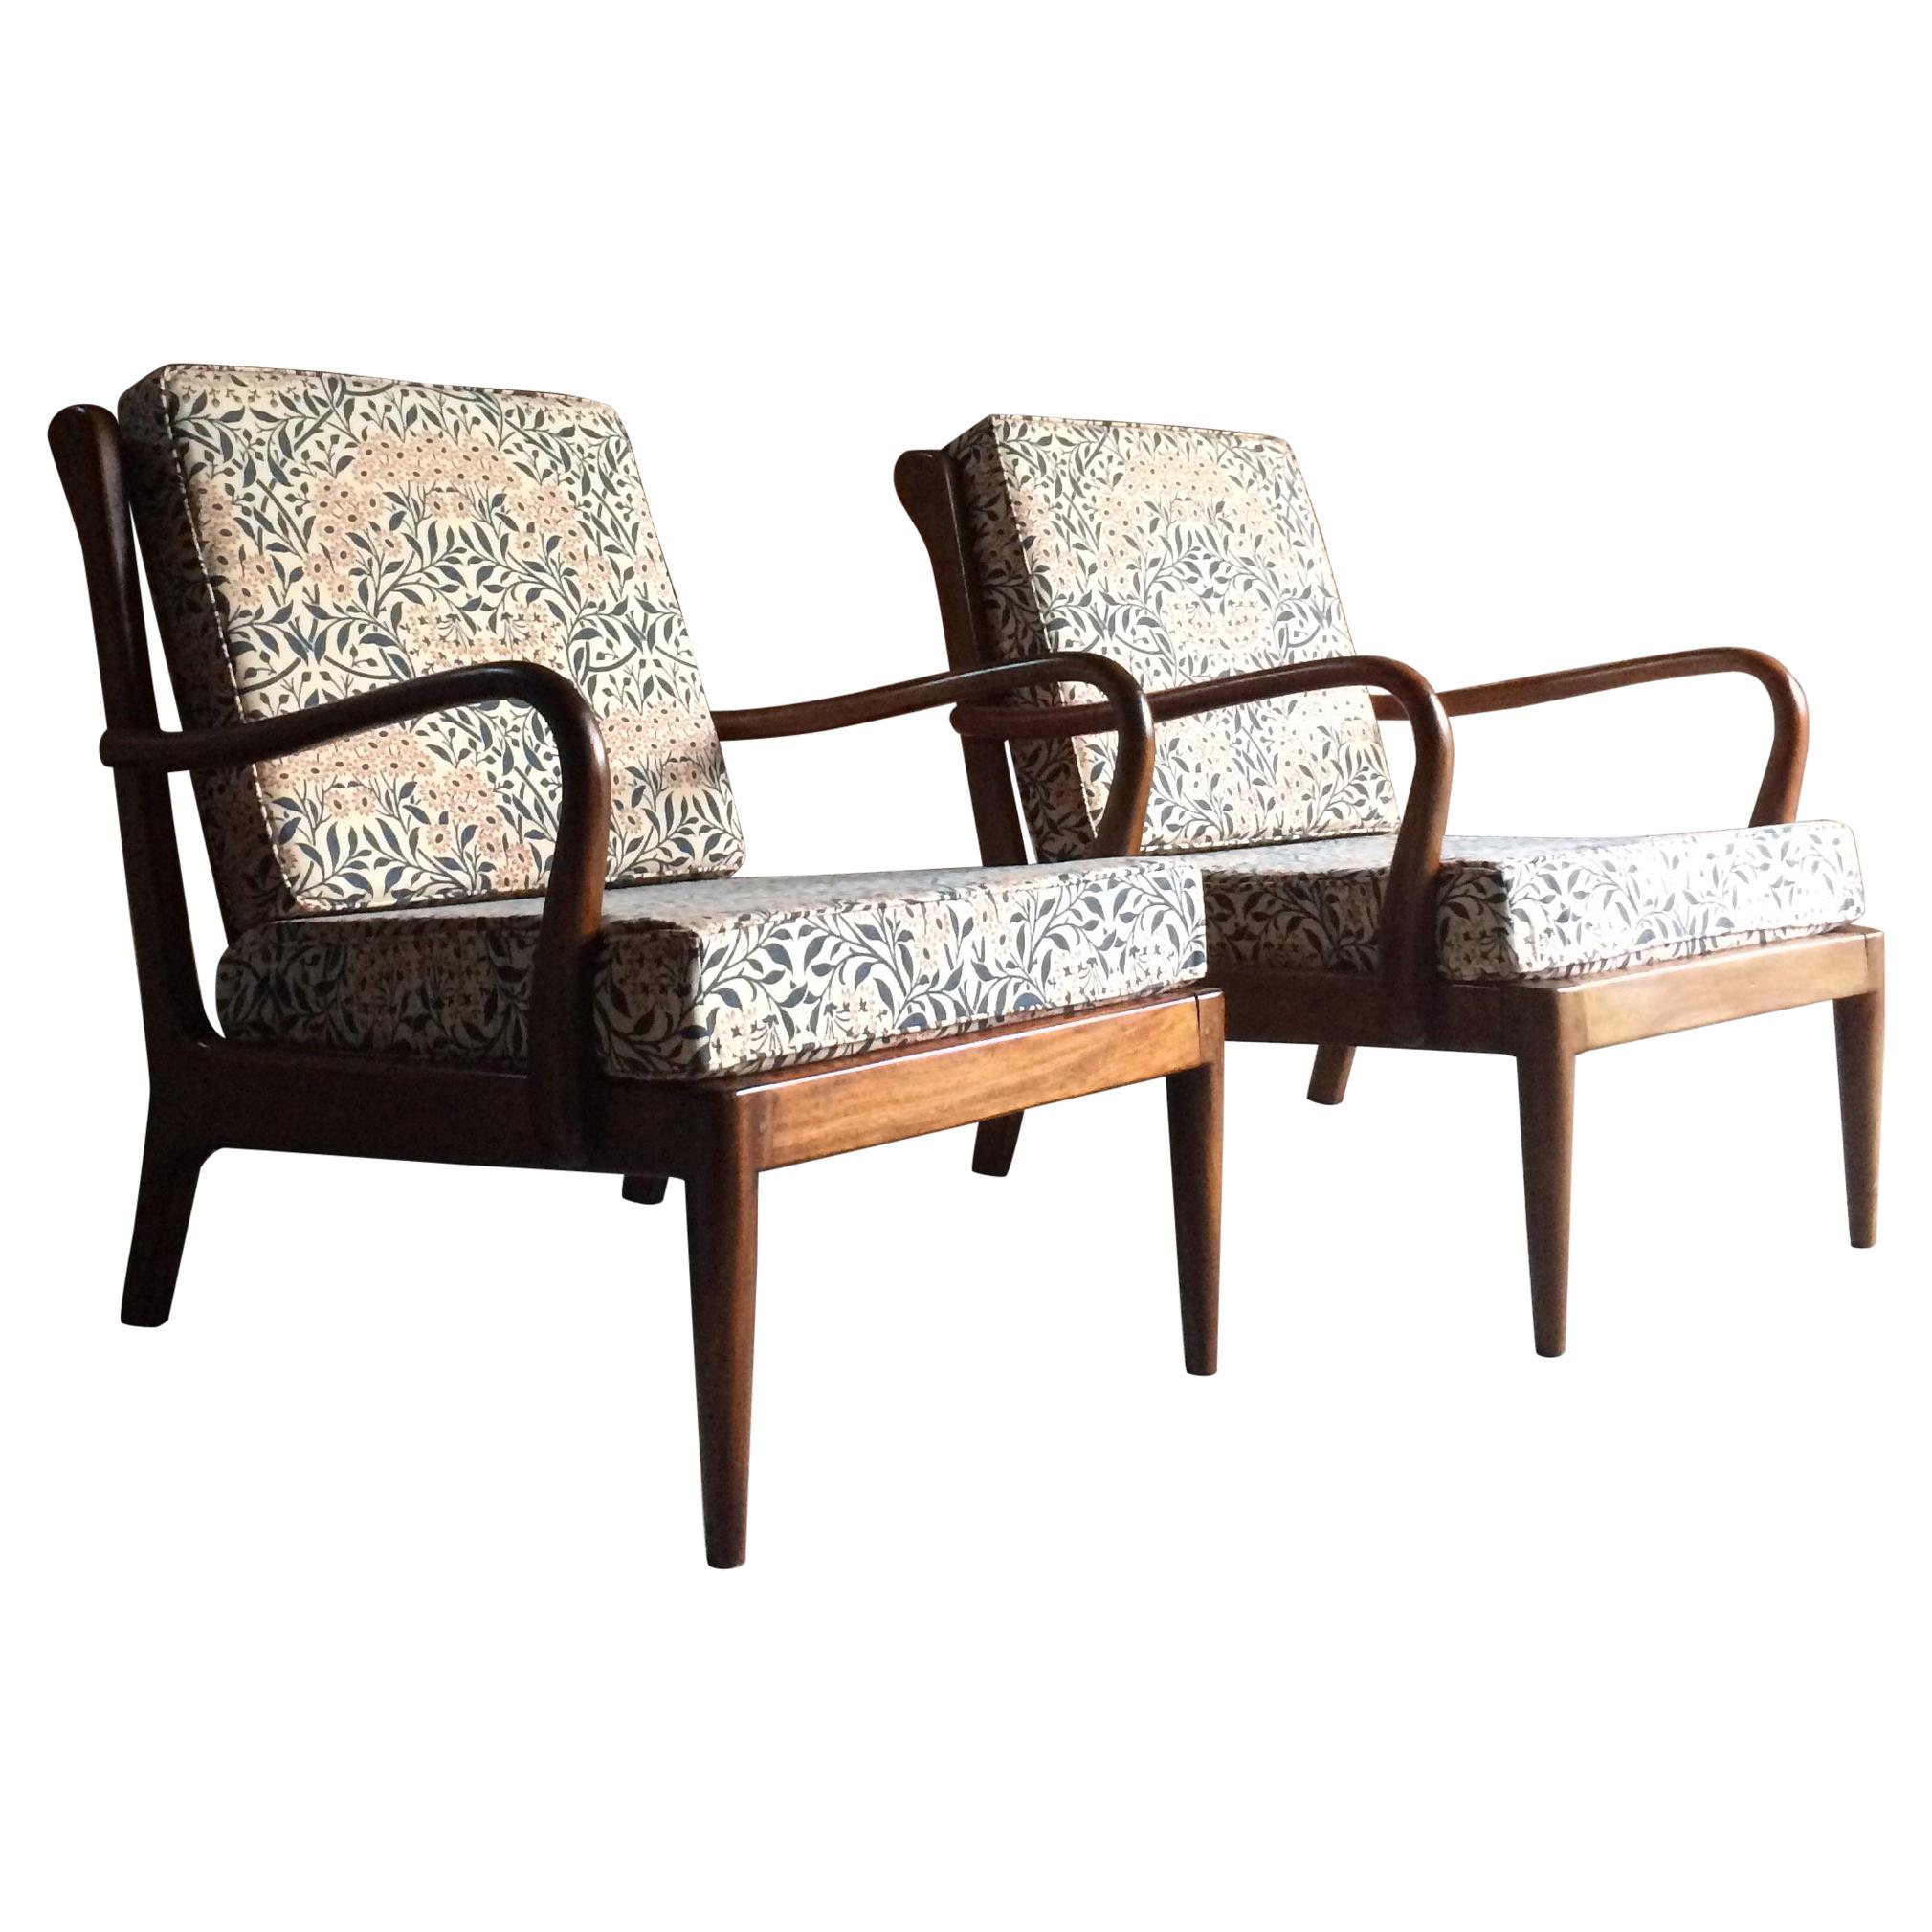 Rare Pair of Robert Heritage Armchairs by George Stone of High Wycombe